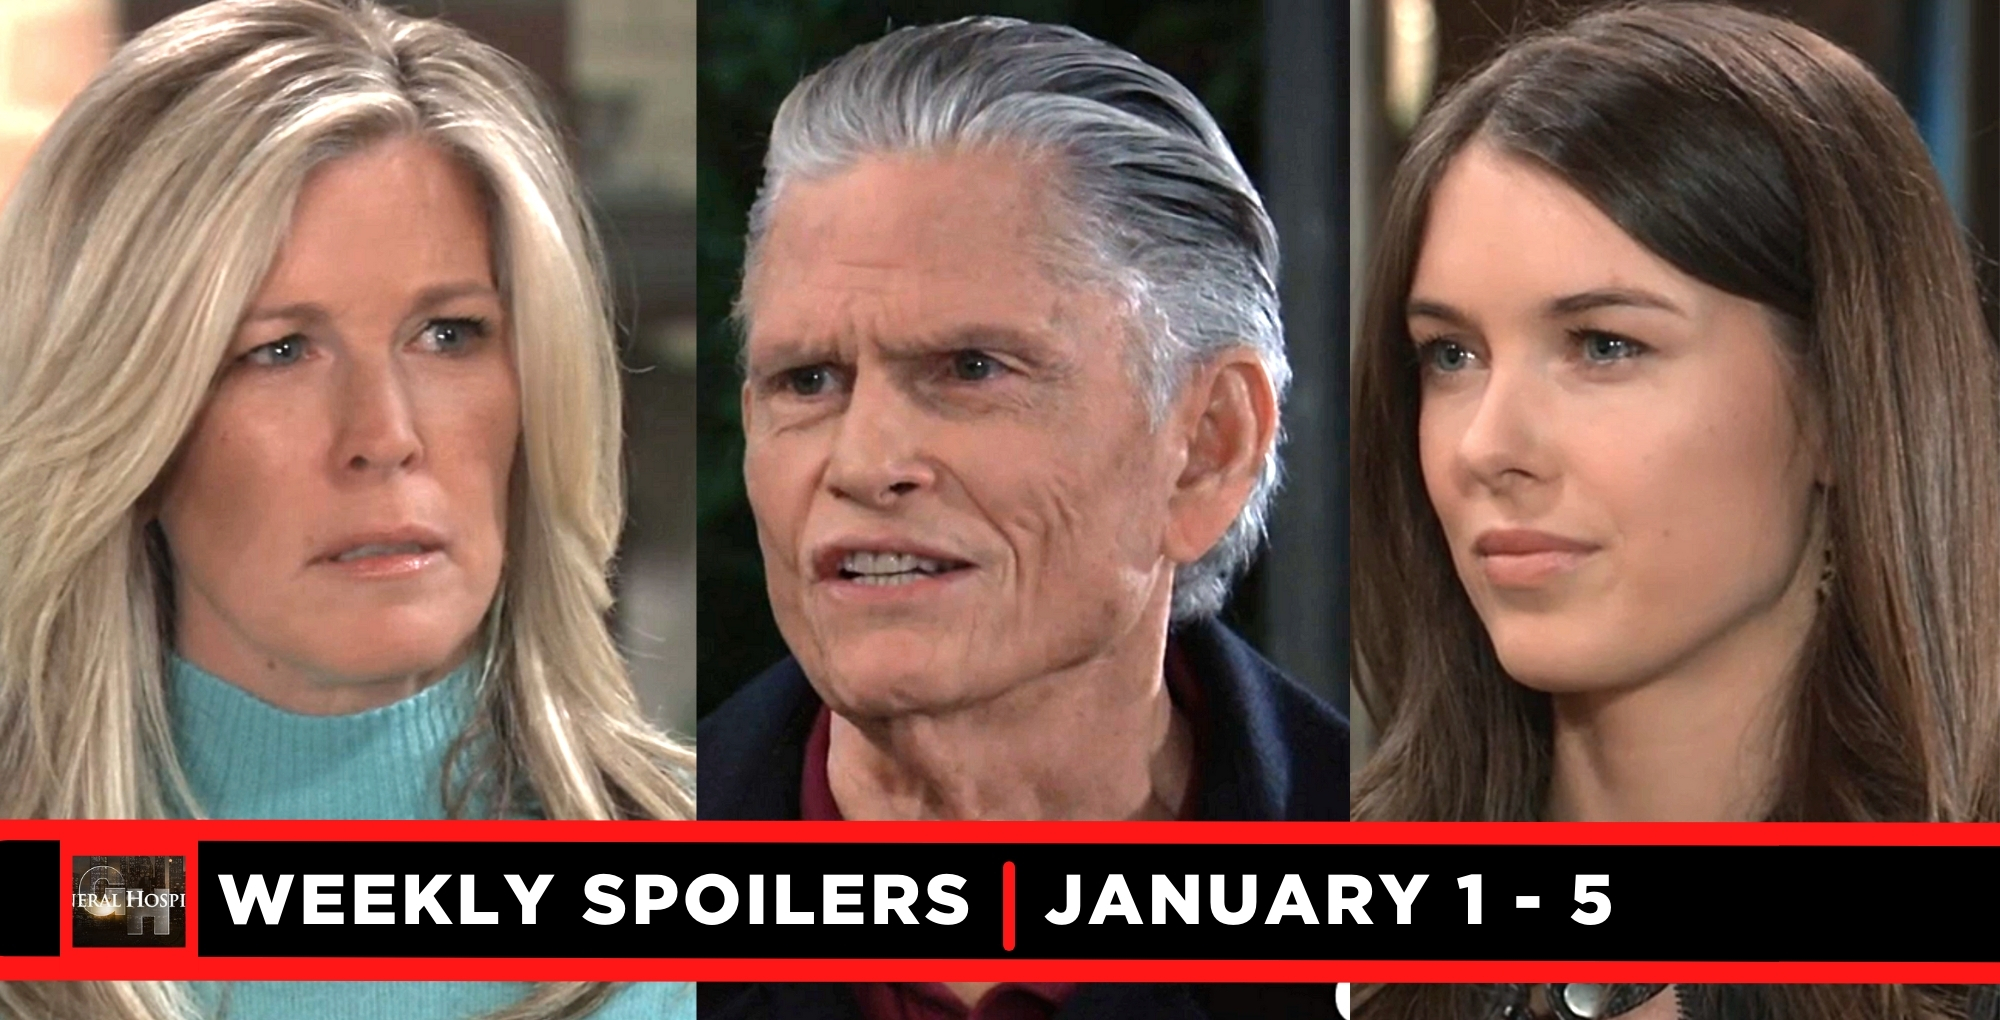 general hospital spoilers for january 1 – january 5, 2024, three images, carly, cyrus, and willow.